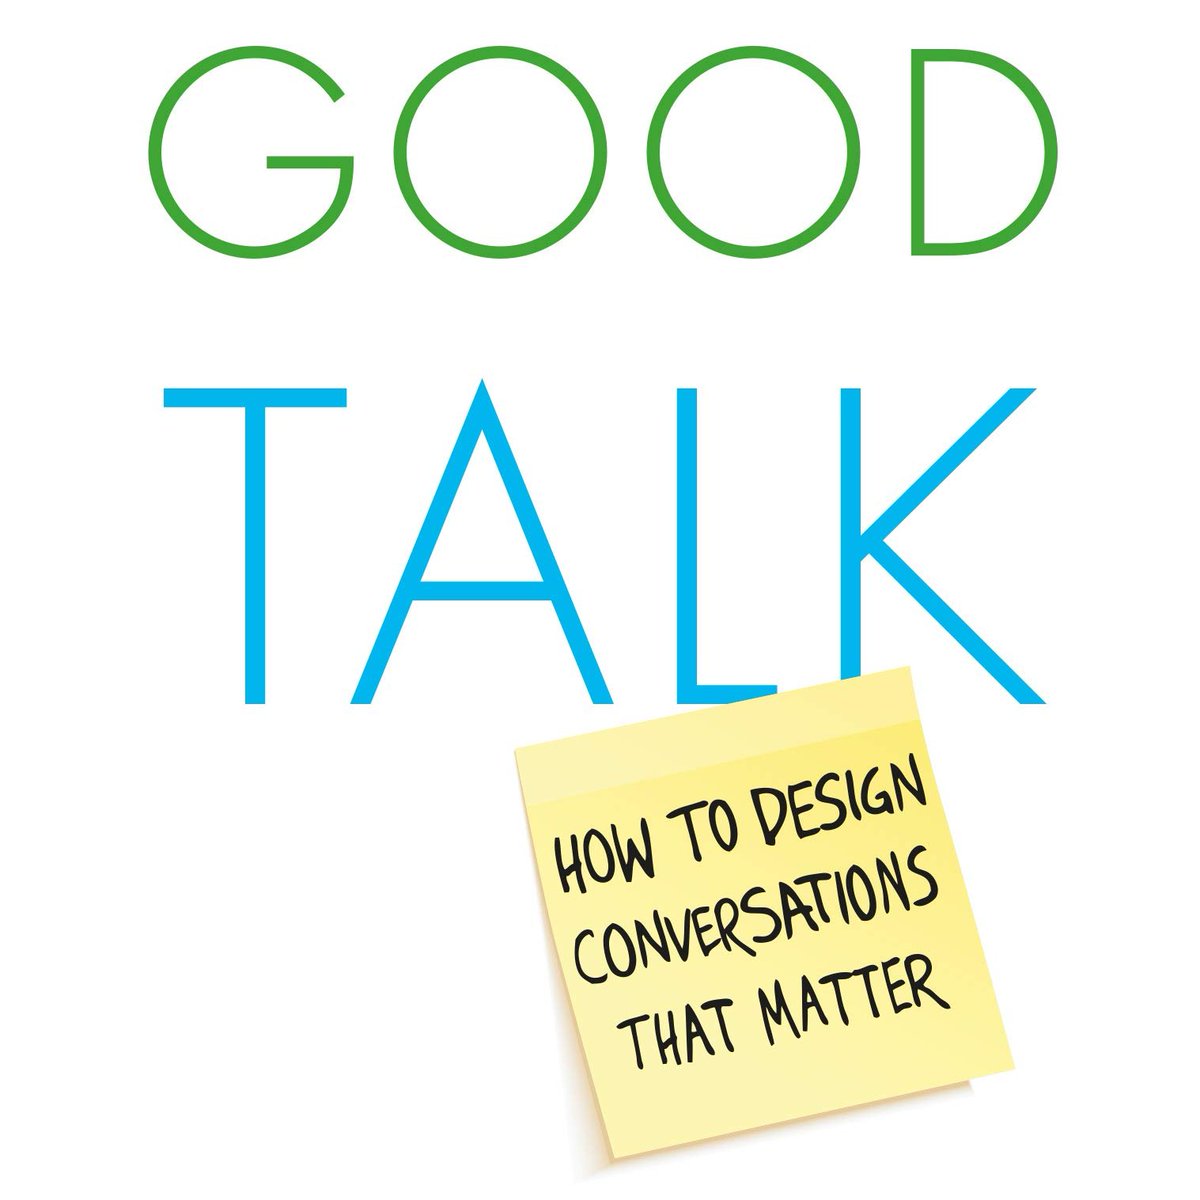 Making meaningful conversations happen is key to effective #businessarchitecture work. Here is a valuable resource that certainly deserves a place on the #bizarchbookshelf: “Good Talk: How to Design Conversations that Matter” by @dastillman.
bit.ly/3MVyUaC #bizarch